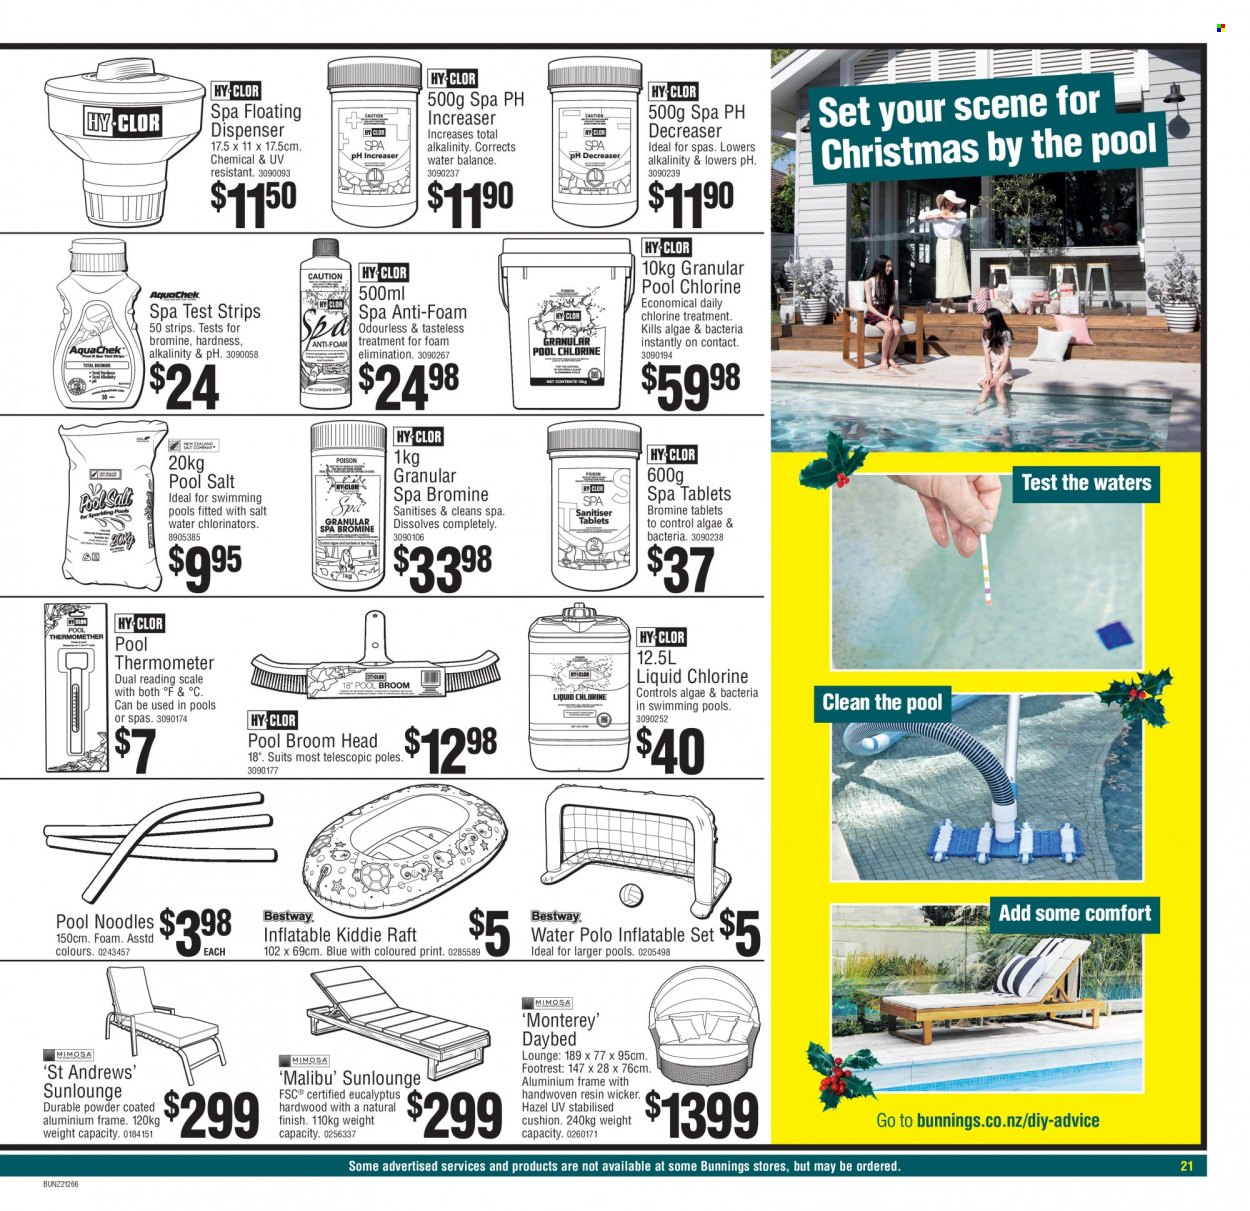 Bunnings Warehouse mailer  - 29.12.2021 - 29.12.2021. Page 21.